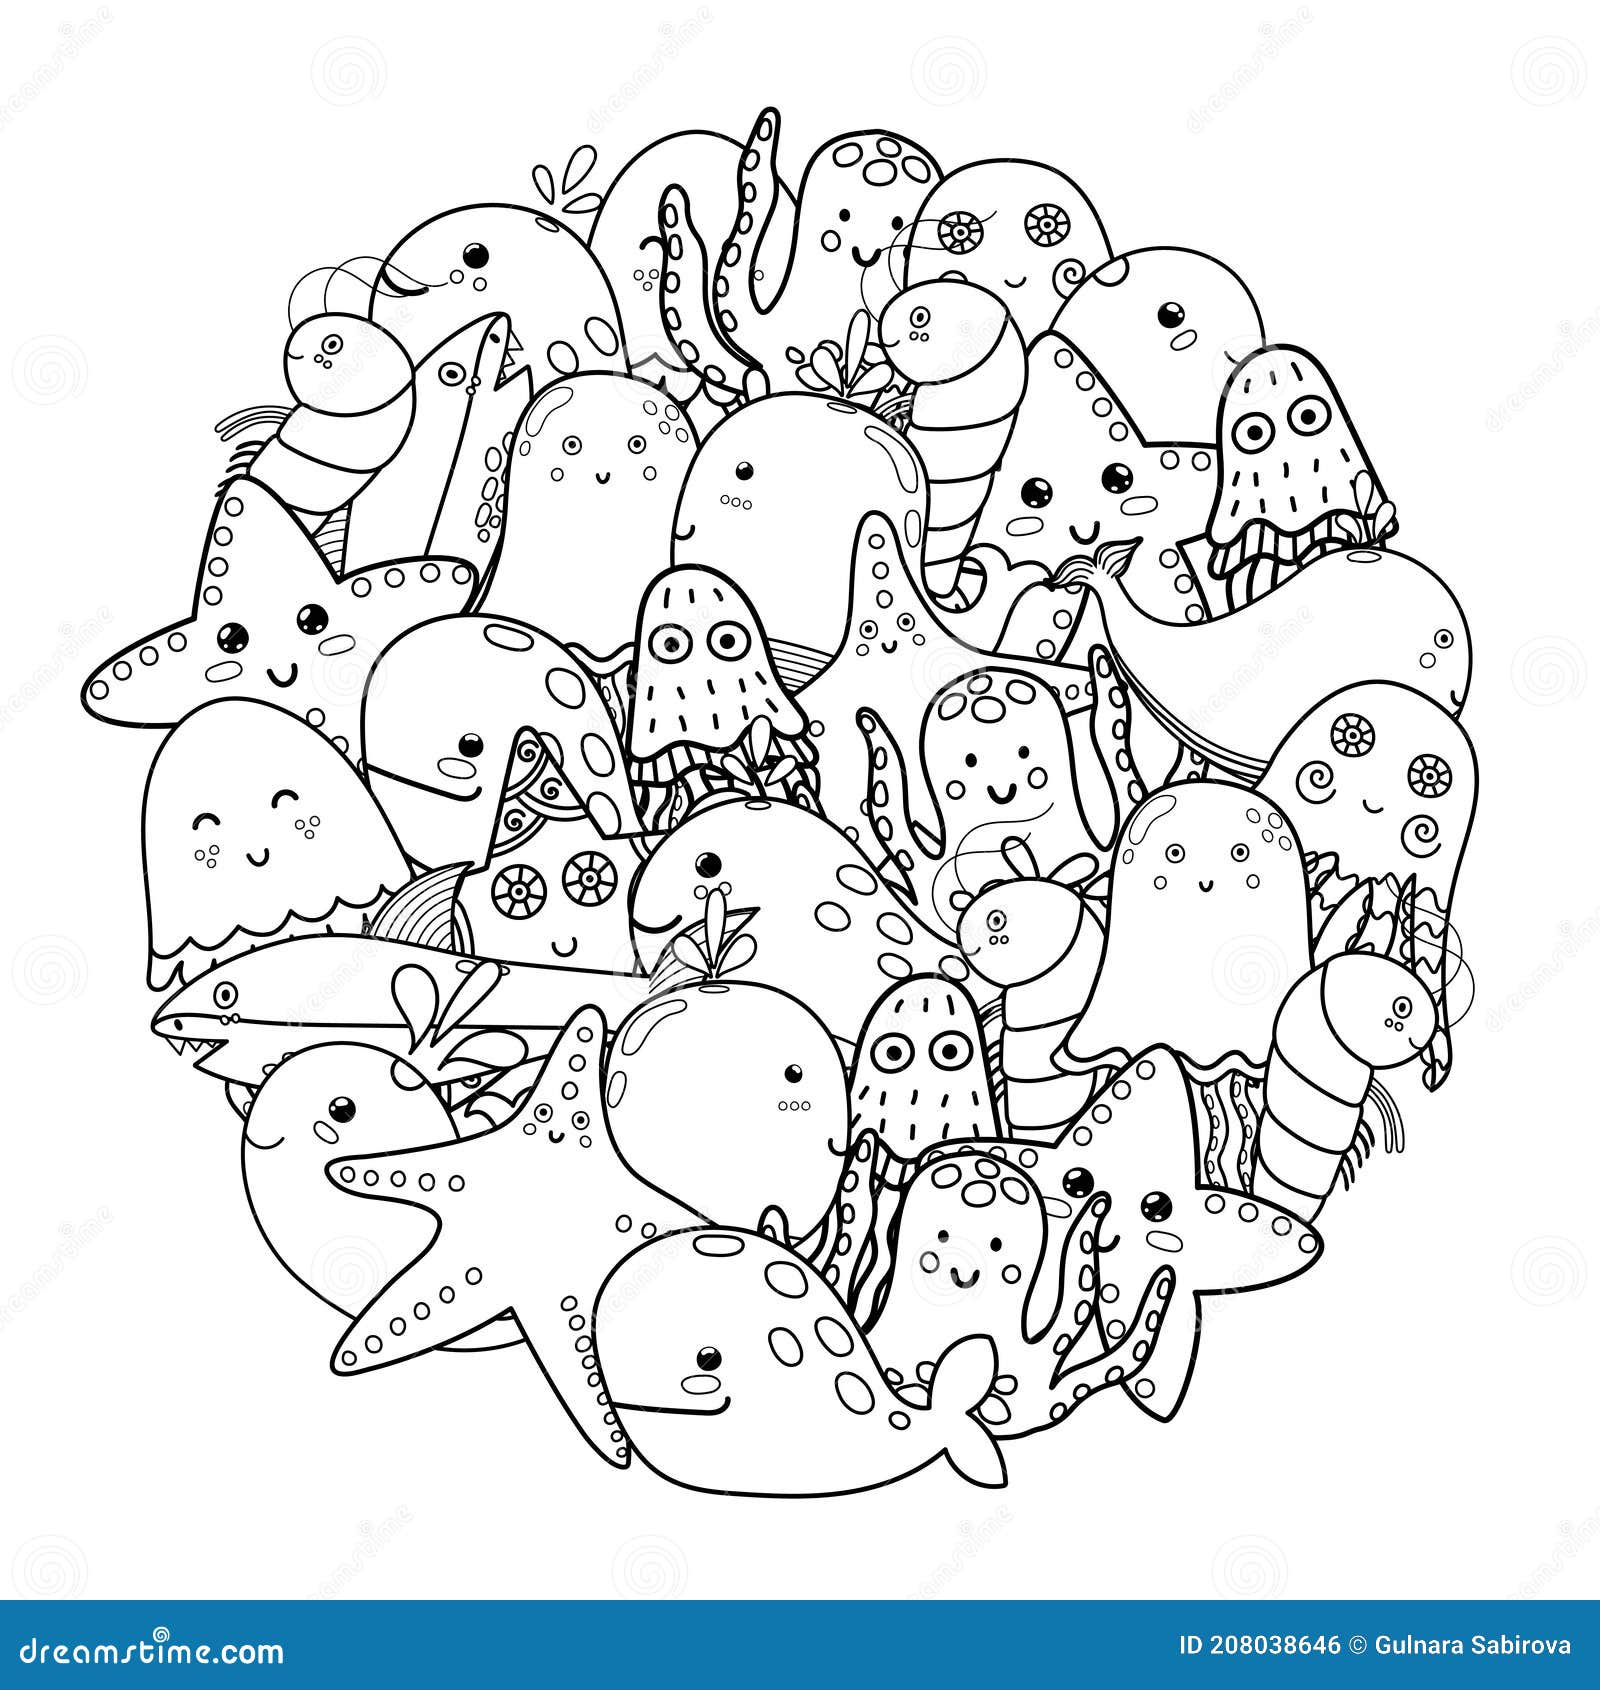 Circle Shape Coloring Page with Sea Animals. Black and White Print for  Coloring Book Stock Vector - Illustration of coloring, animals: 208038646